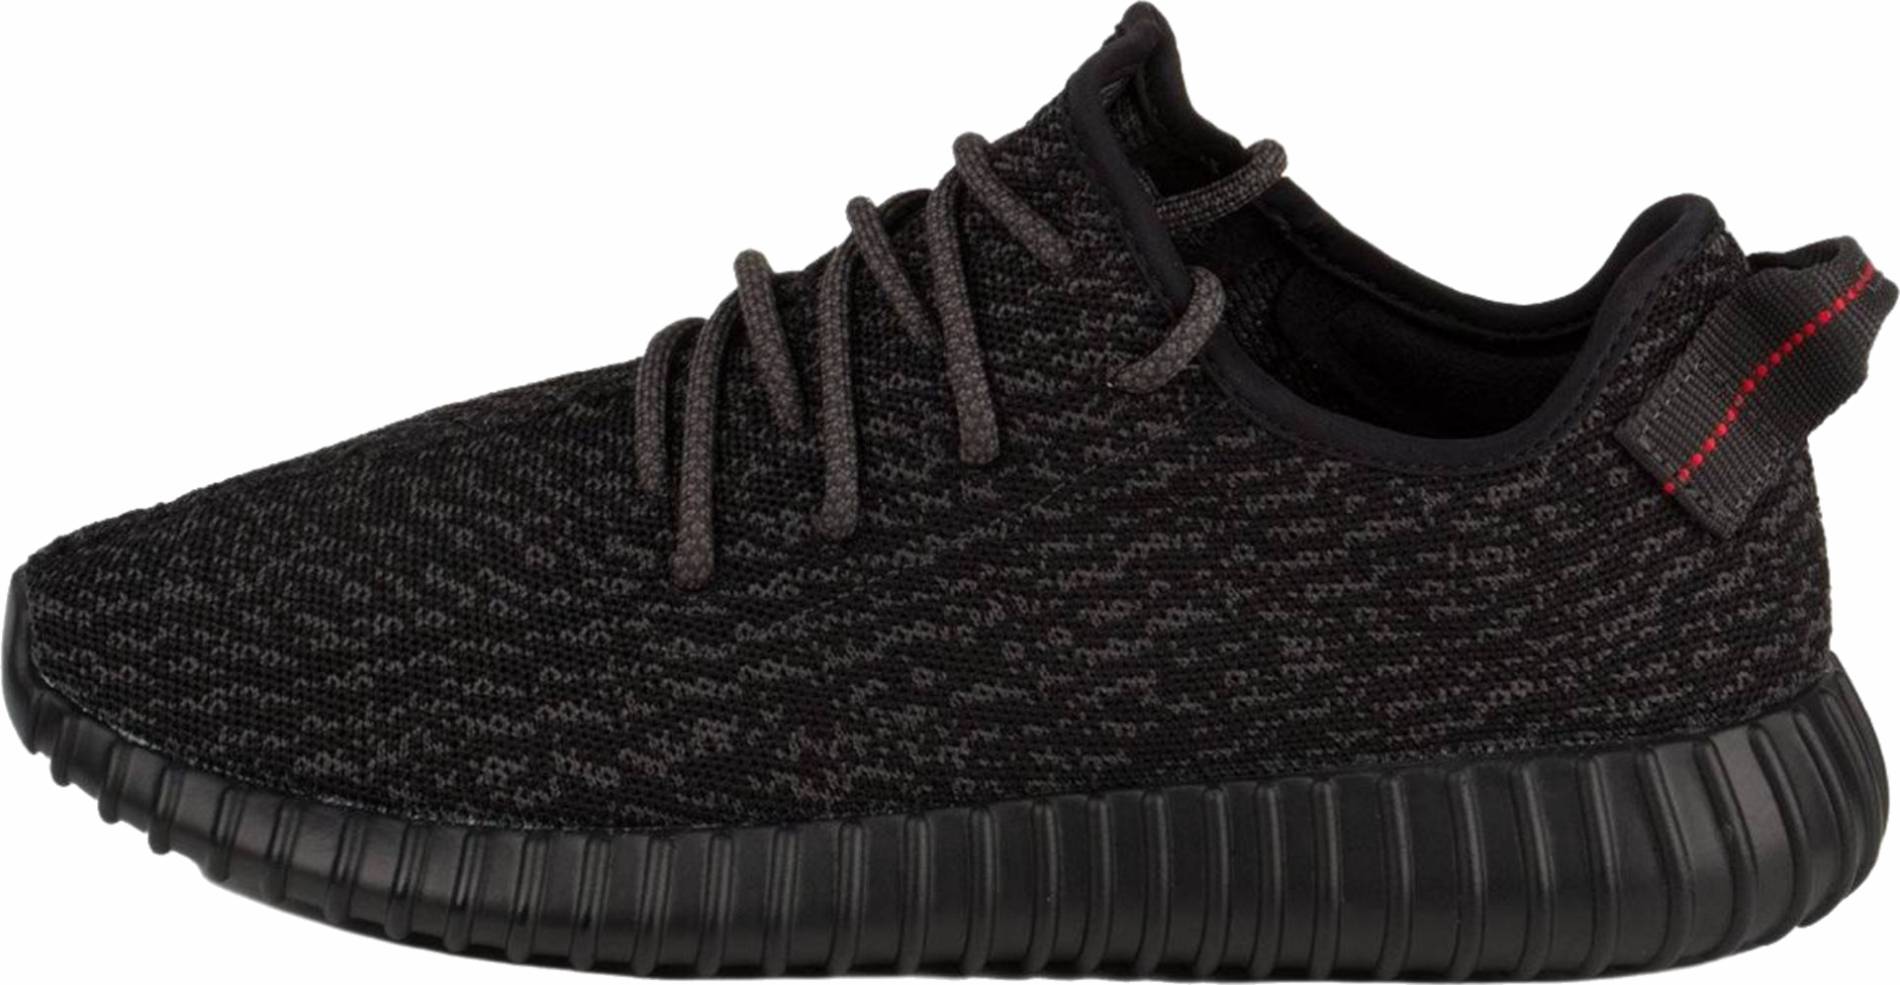 adidas yeezy limited edition price